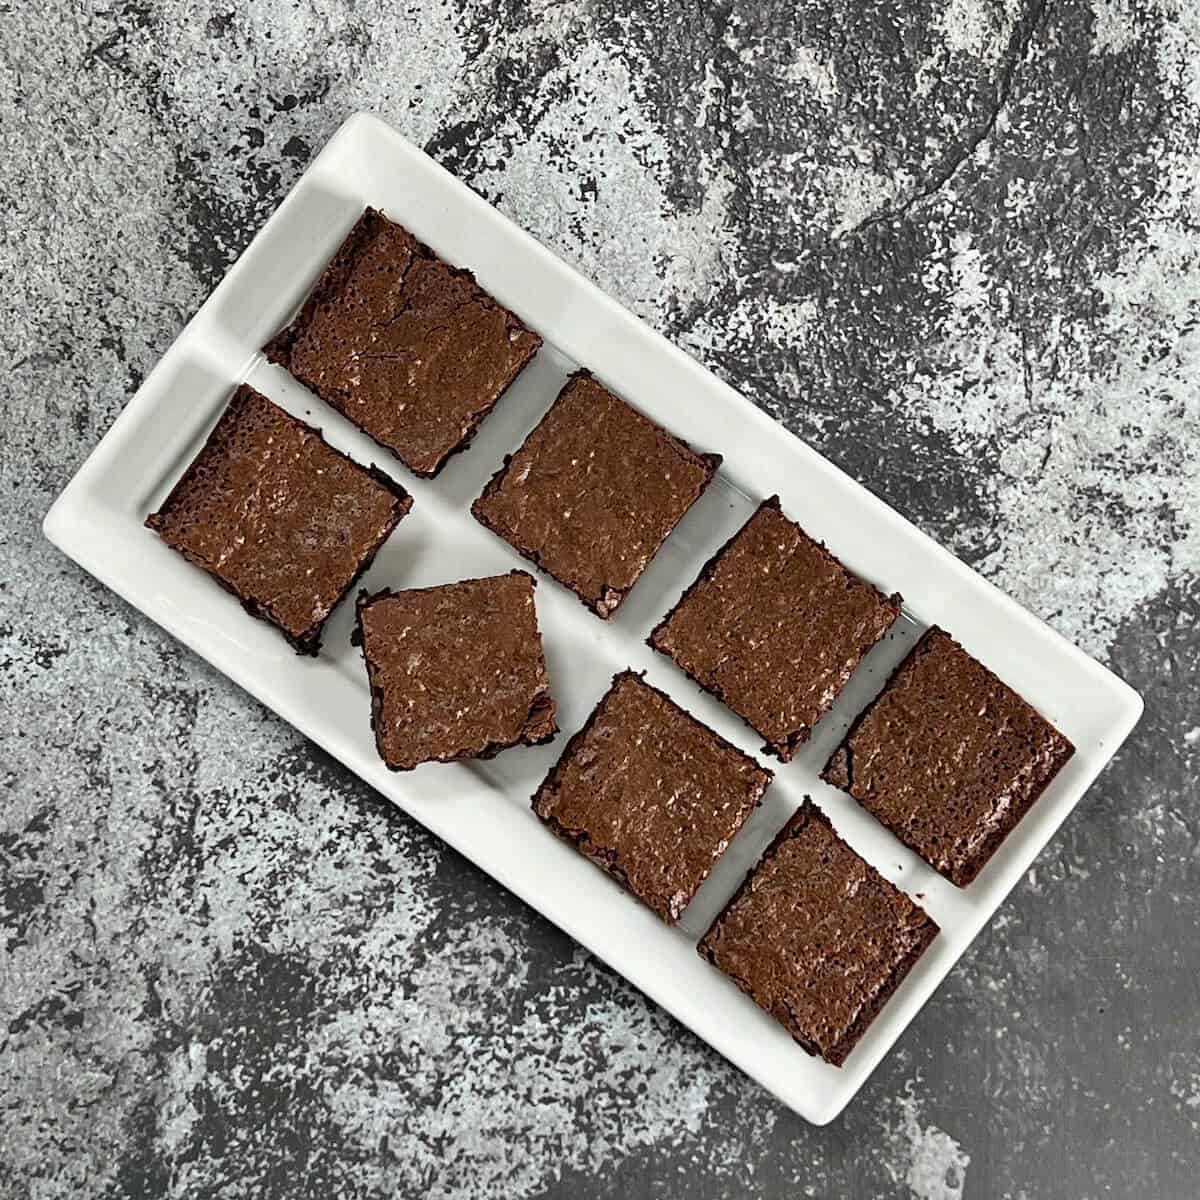 Two rows of four bourbon brownies lined up on a diagonally-placed white rectangular plate with on turned diagonally from overhead.